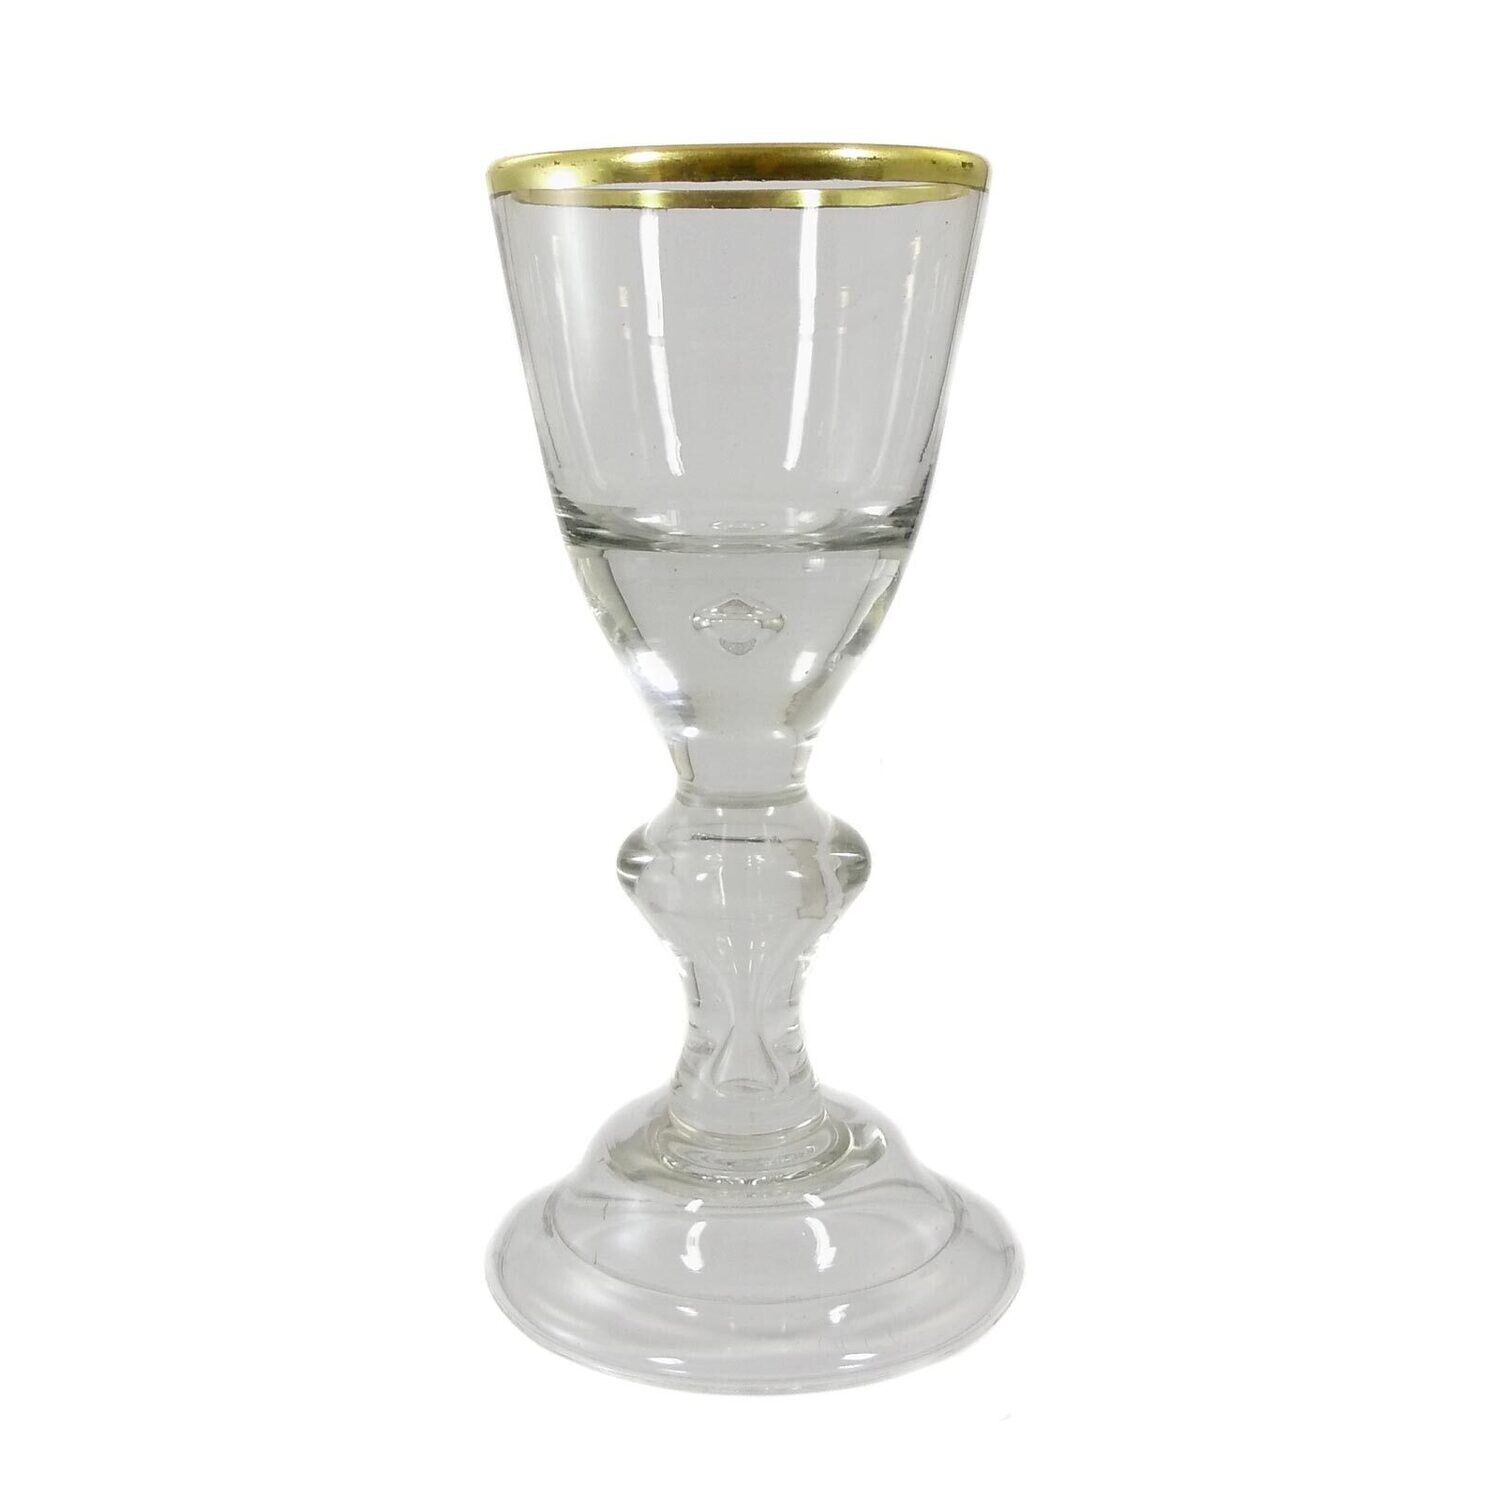 Lauenstein goblet glass with gold rim, A.C.G. 2nd half of the 18th century